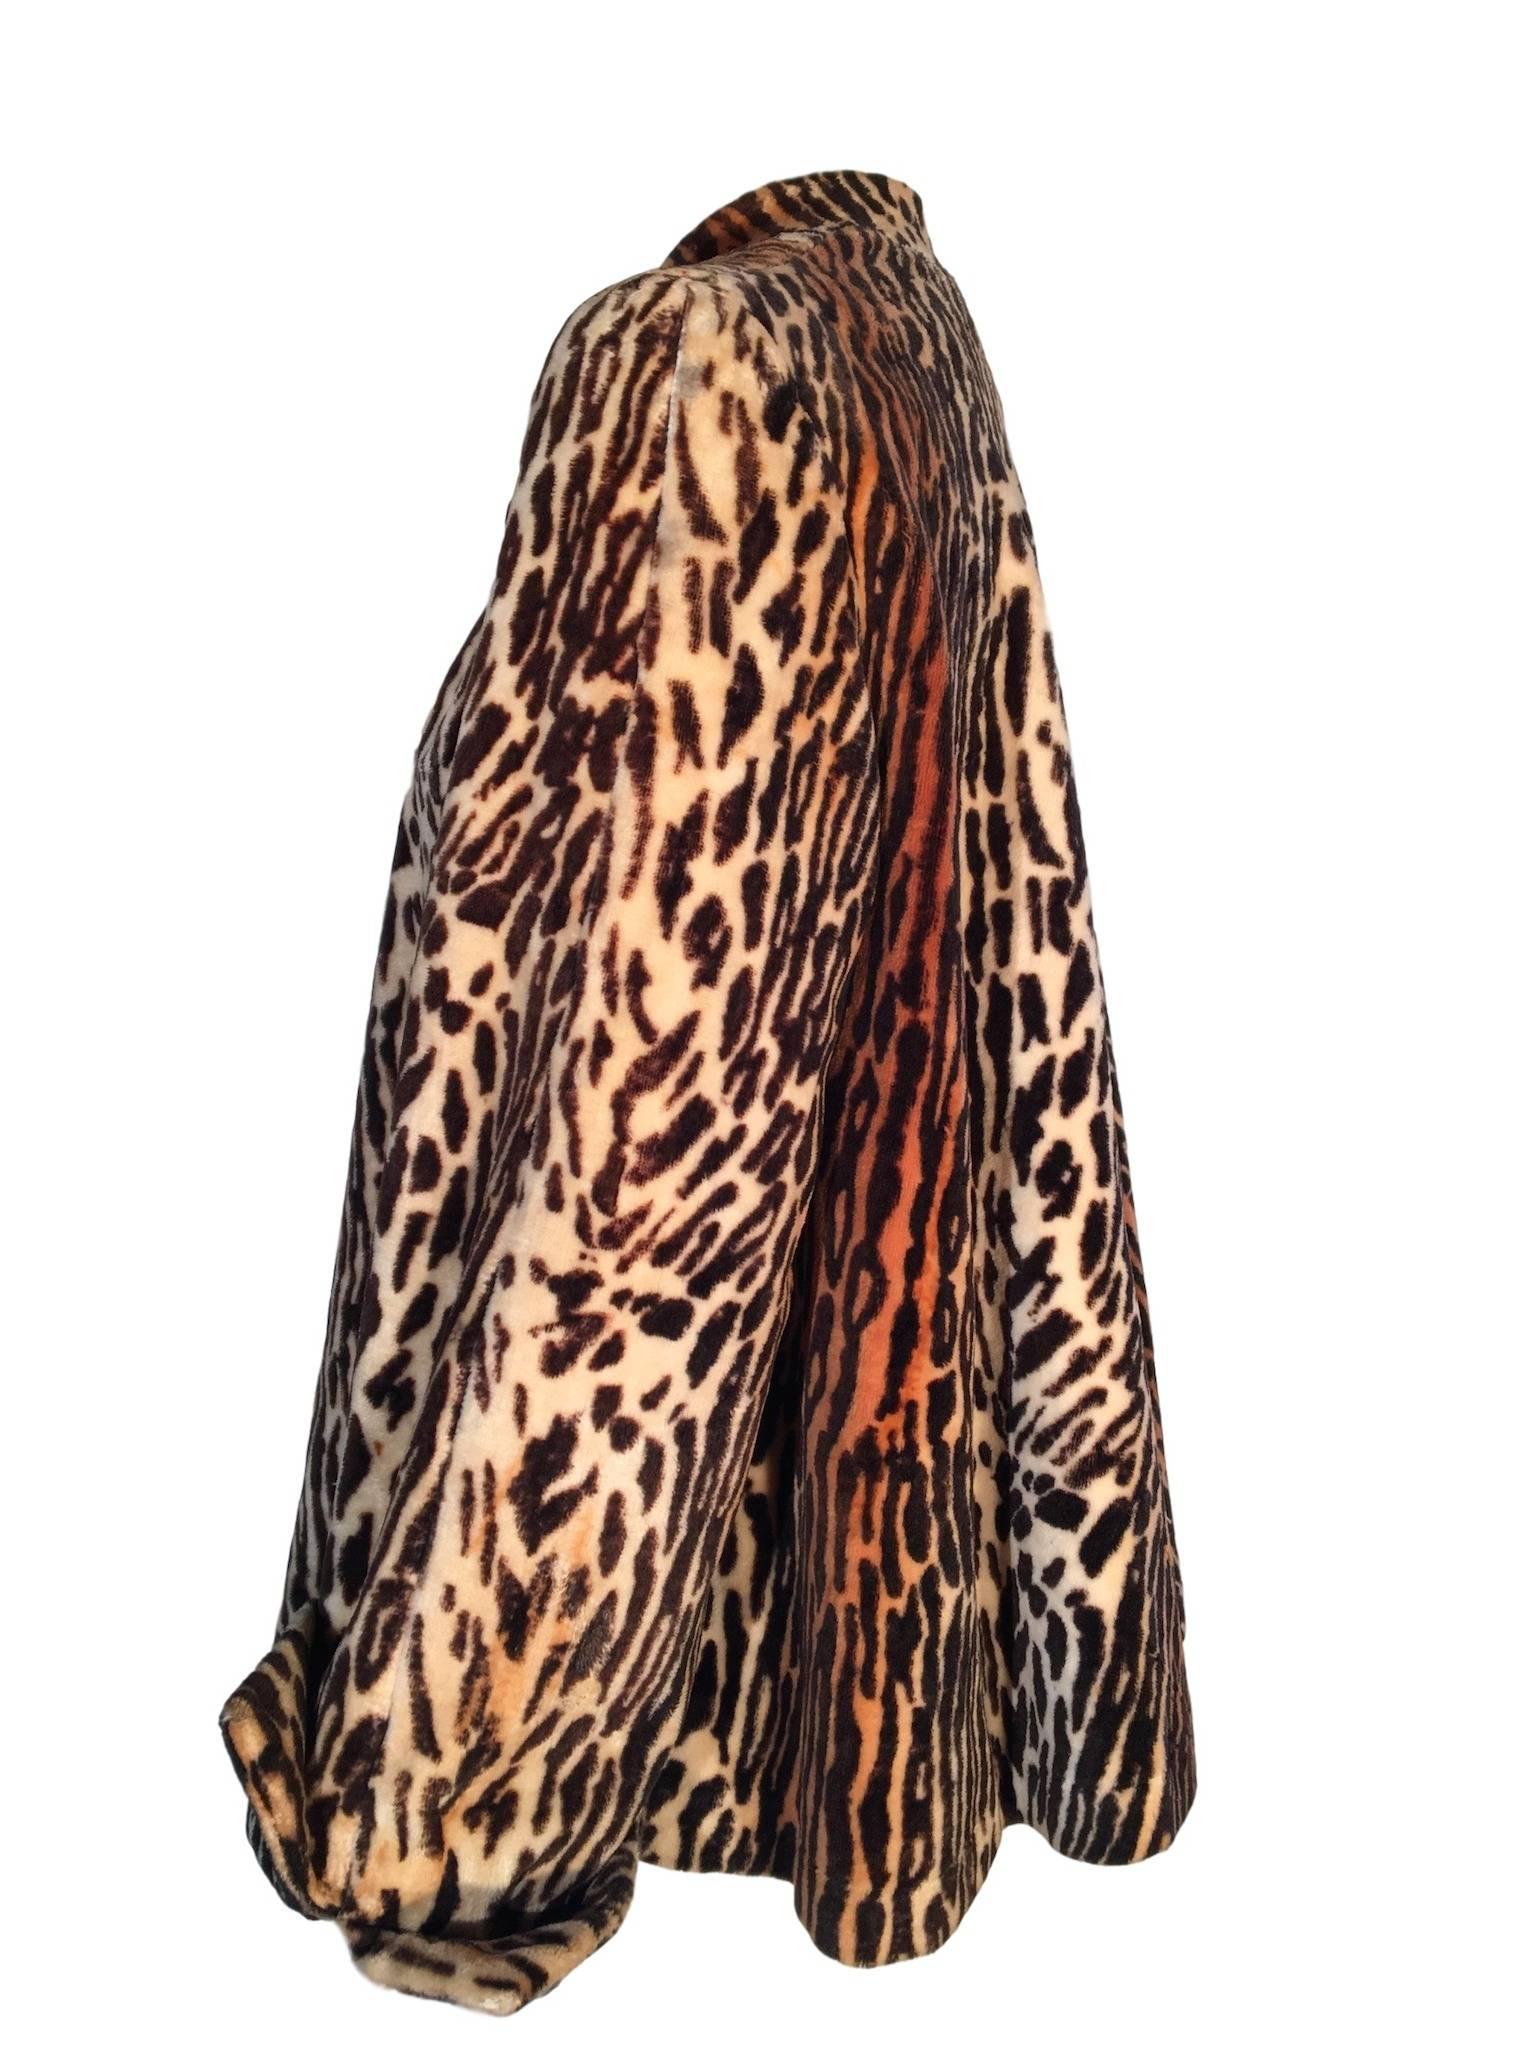 Rebere of Mayfair leopard faux fur coat, swing shape and has structure on the shoulders, lined with a silky crepe like material, the sleeves are wide with turn up cuffs and it has a collarless neck line. 

In excellent condition, the label is coming